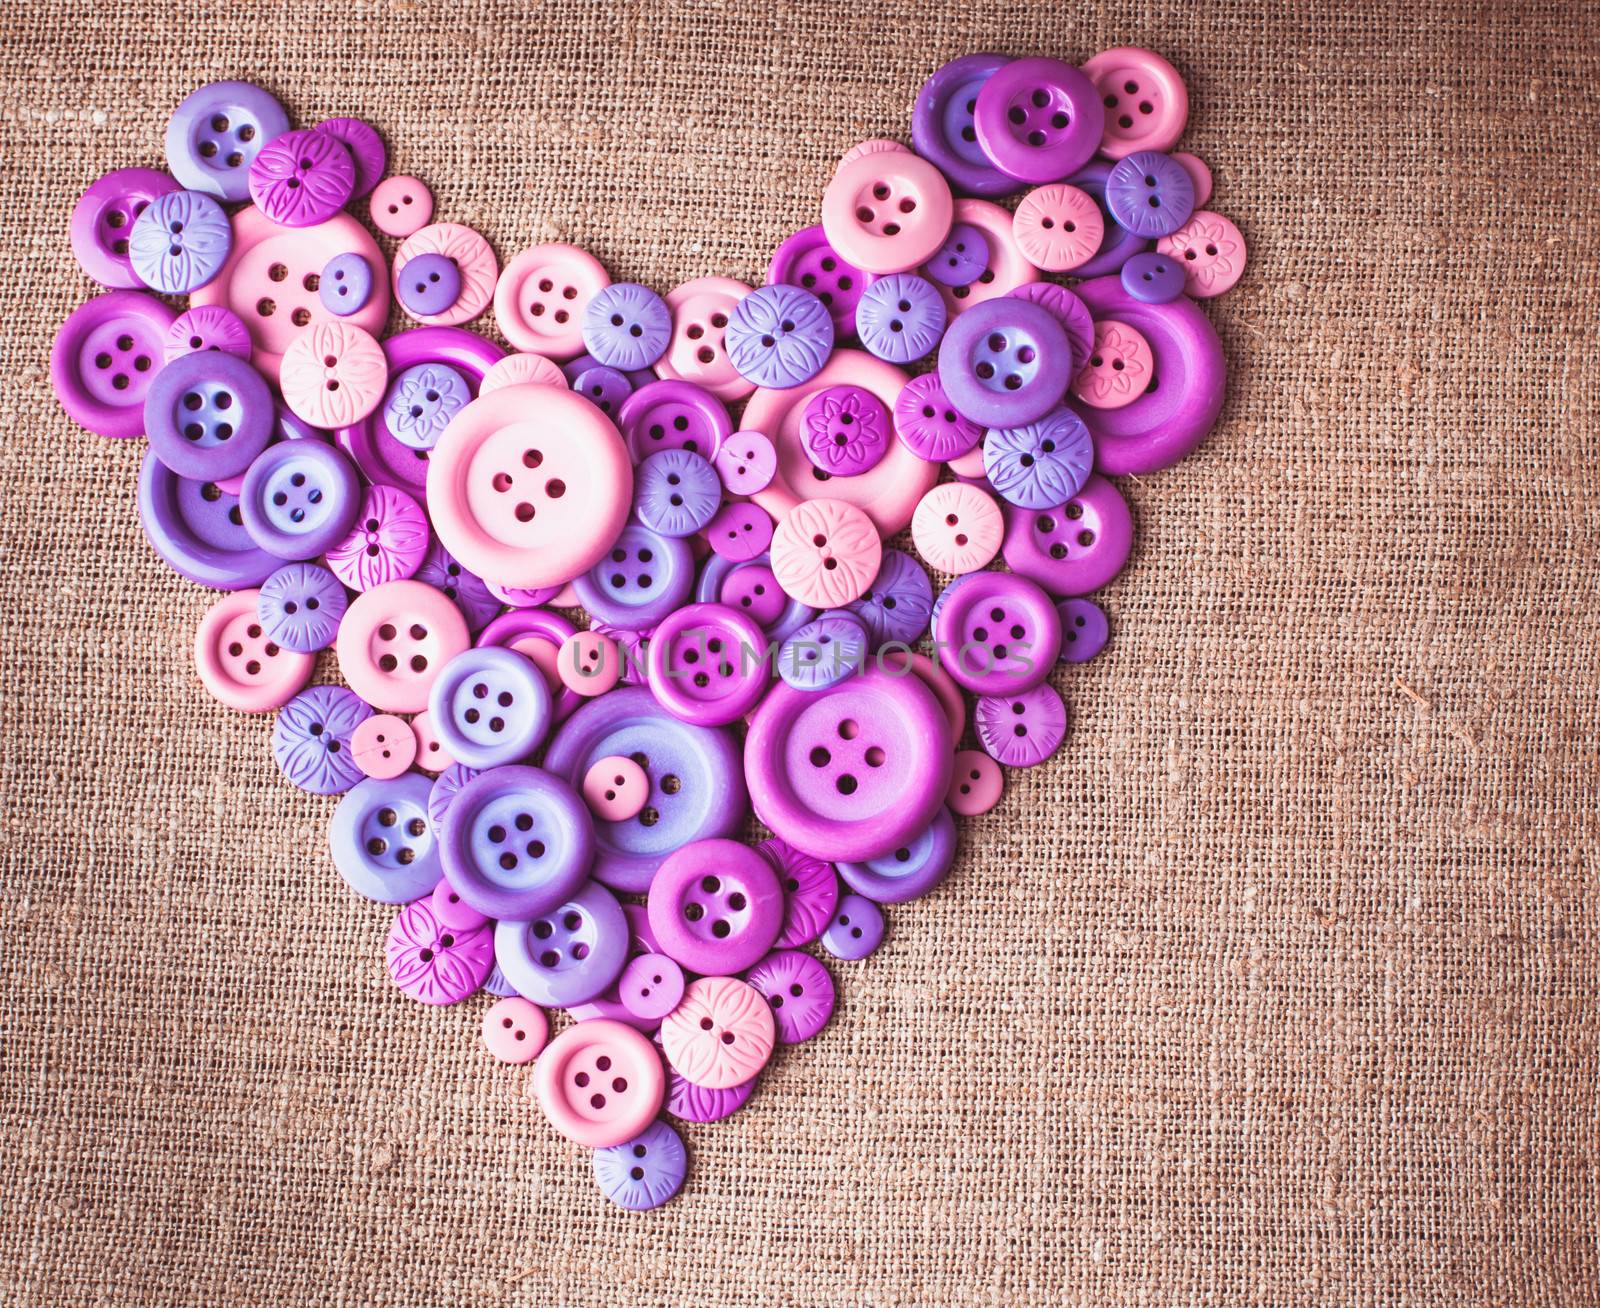 Heart shape from buttons over canvas textile